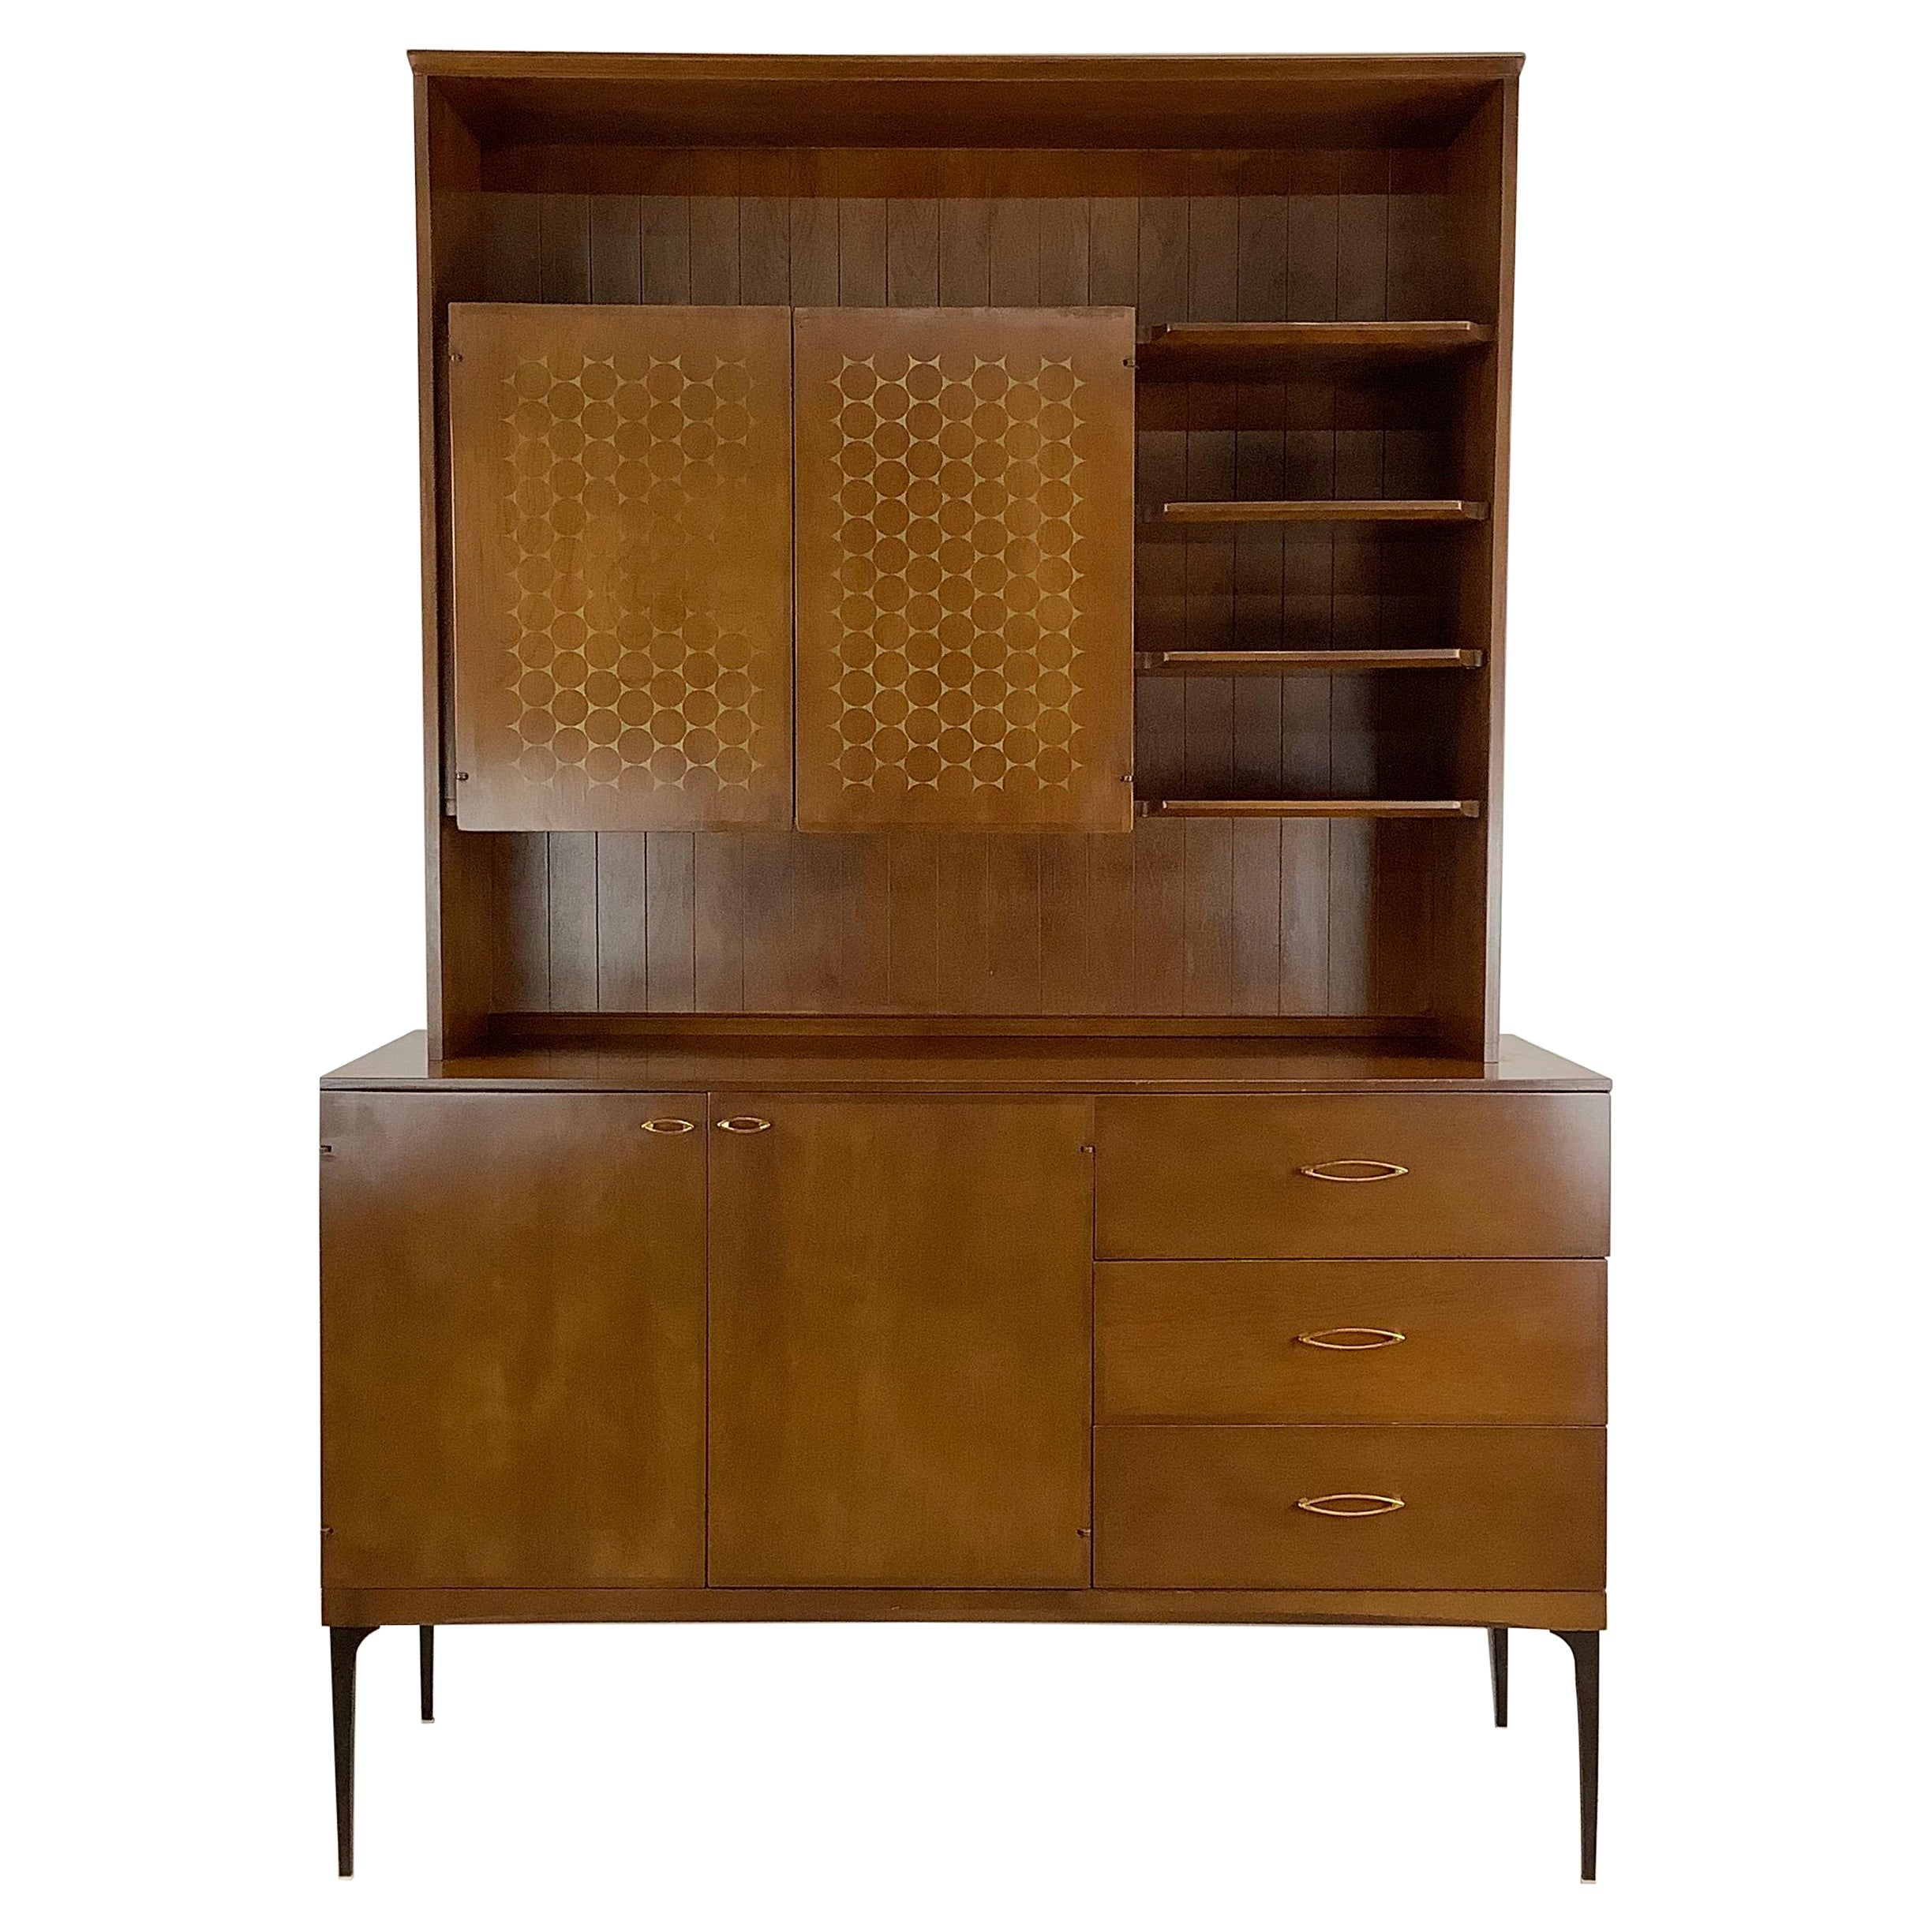 Rare Heywood Wakefield "Contessa" Sideboard With Hutch by Carl Otto For Sale